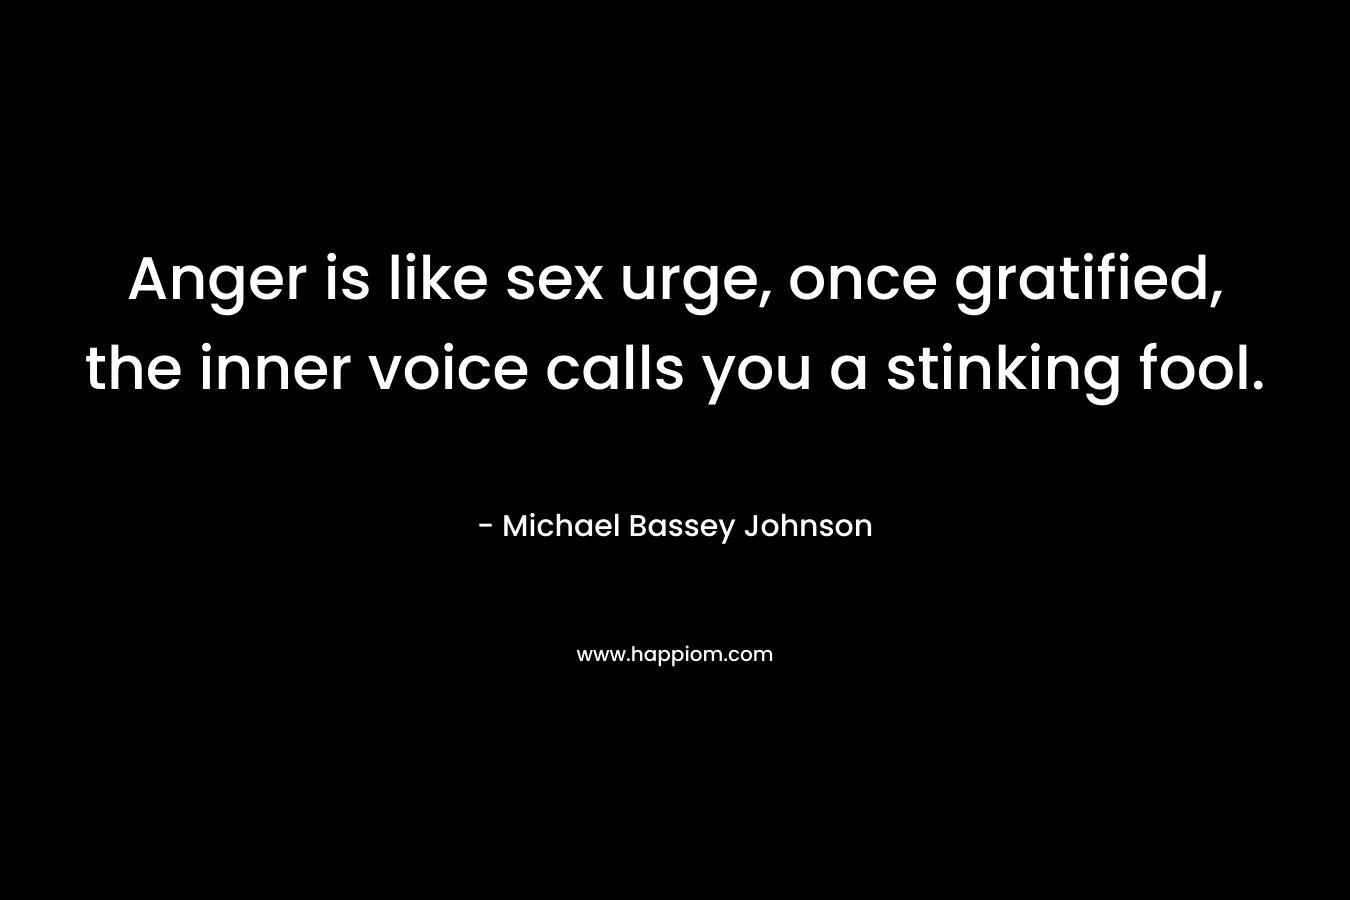 Anger is like sex urge, once gratified, the inner voice calls you a stinking fool. – Michael Bassey Johnson